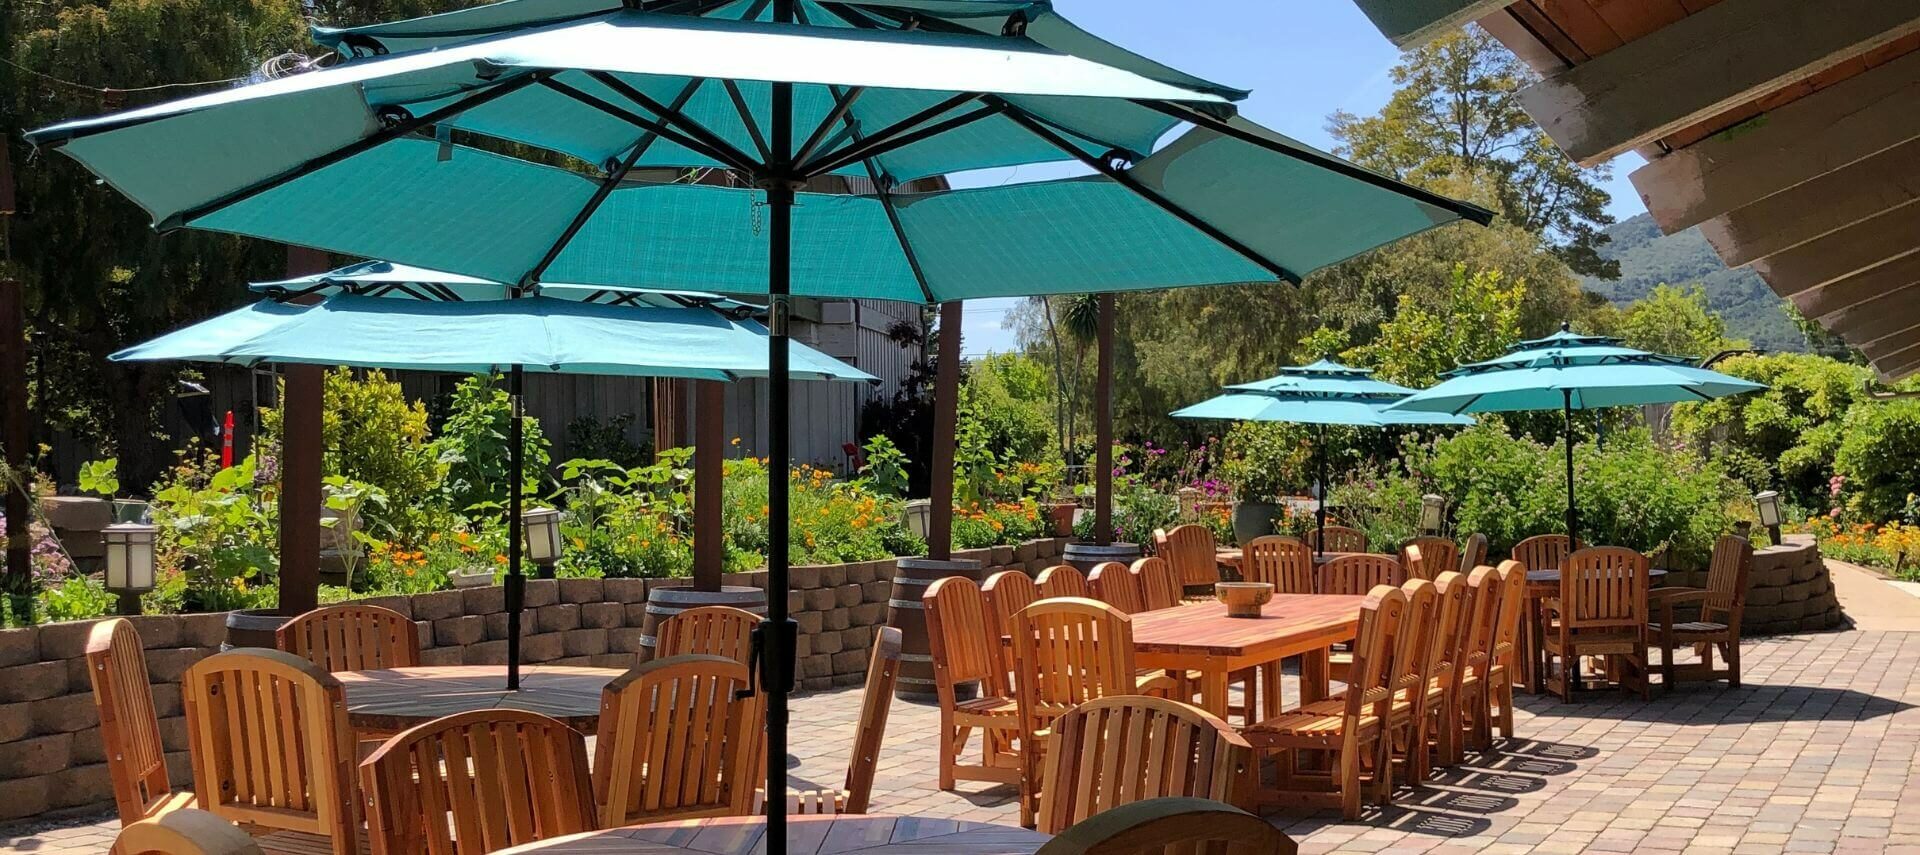 New outdoor patio at the Carmel Valley Lodge